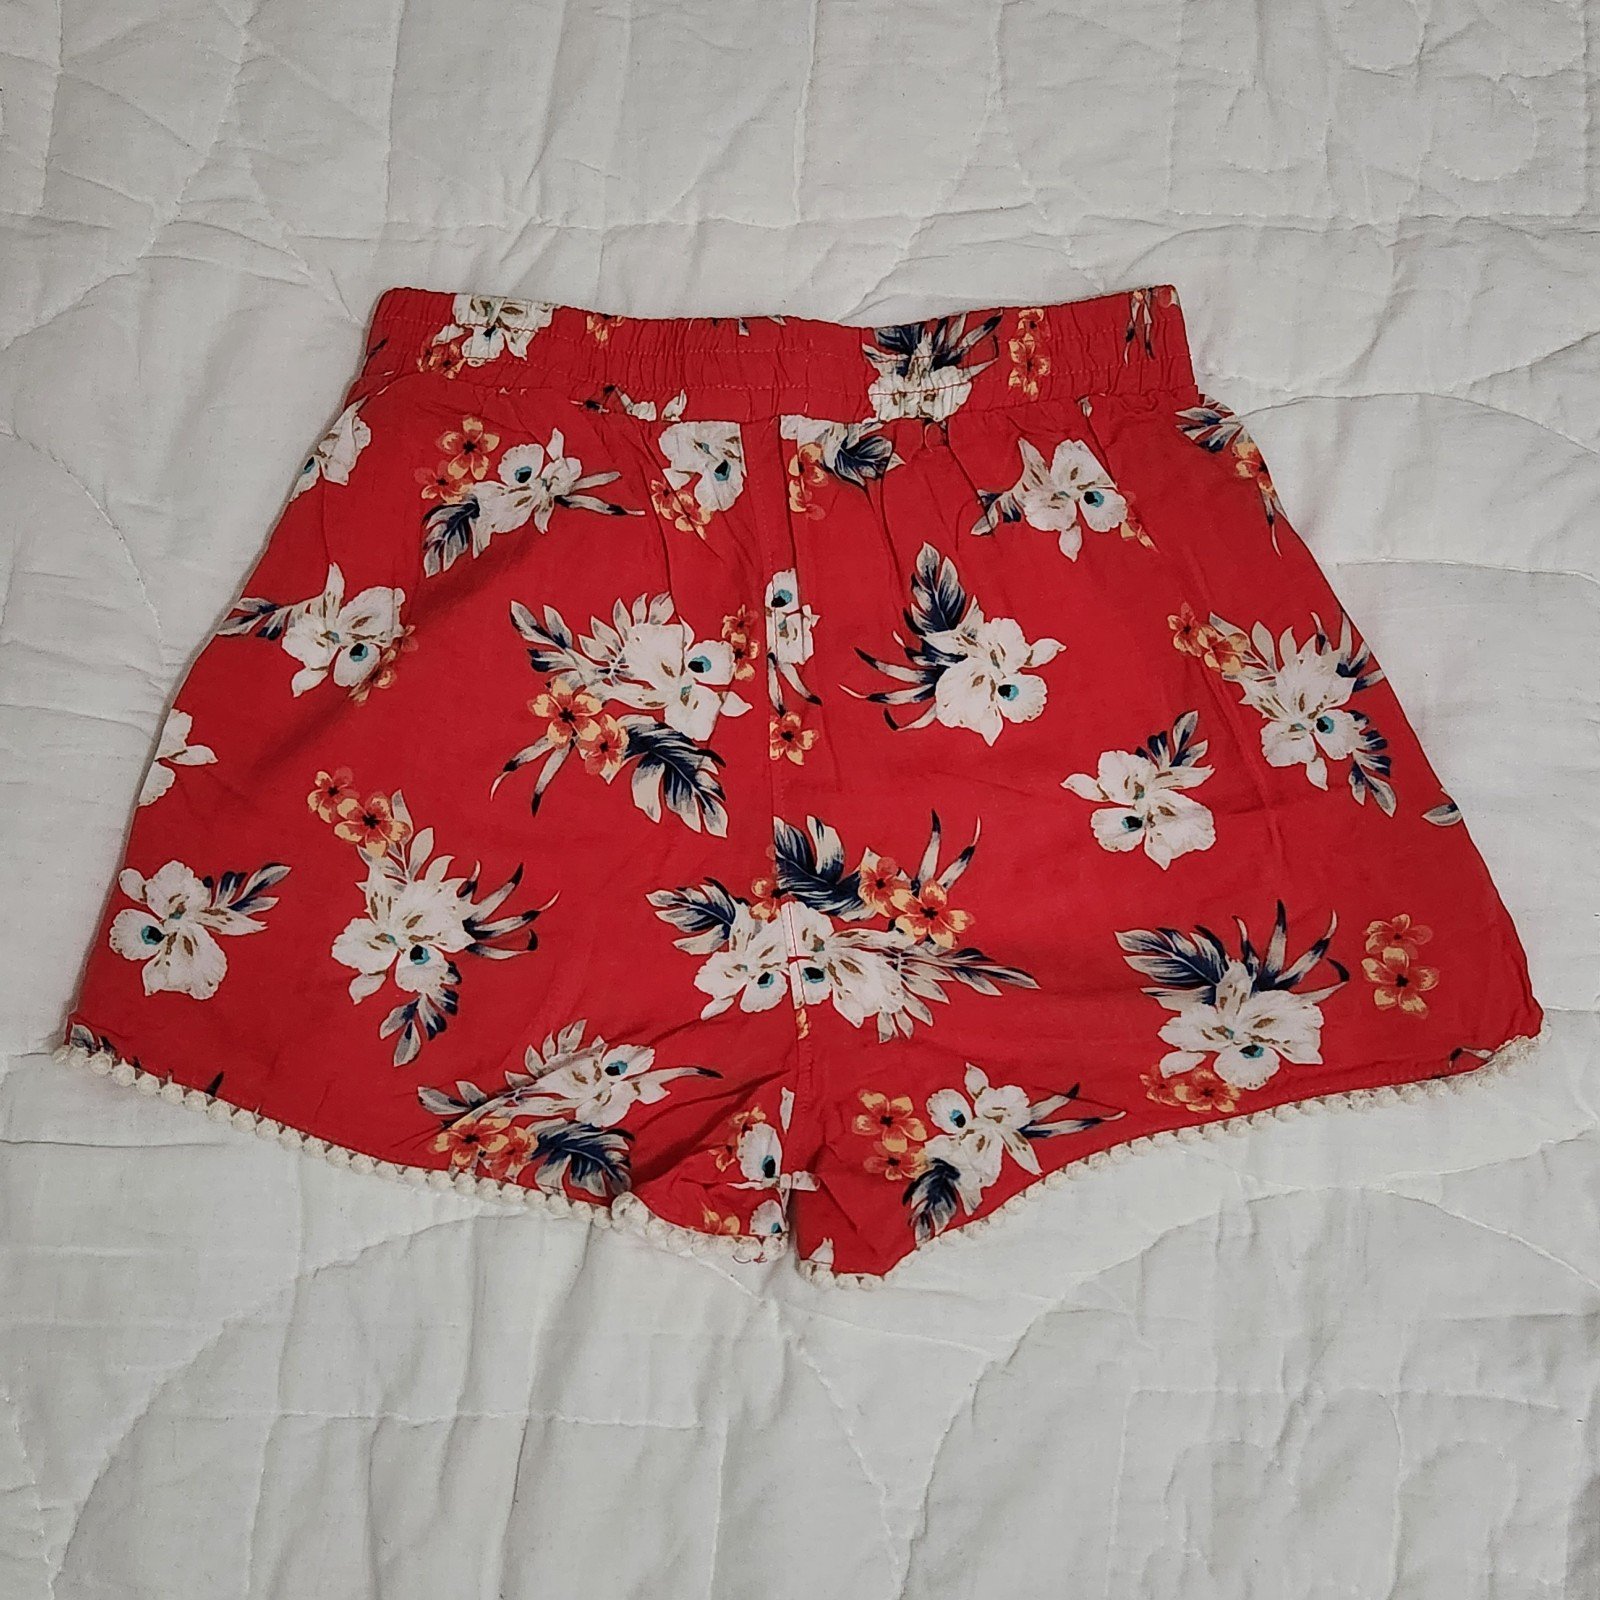 The Best Seller Hollister Red Floral Pom Pom Drapey Shorts - Size XS OlACwXtWv Wholesale